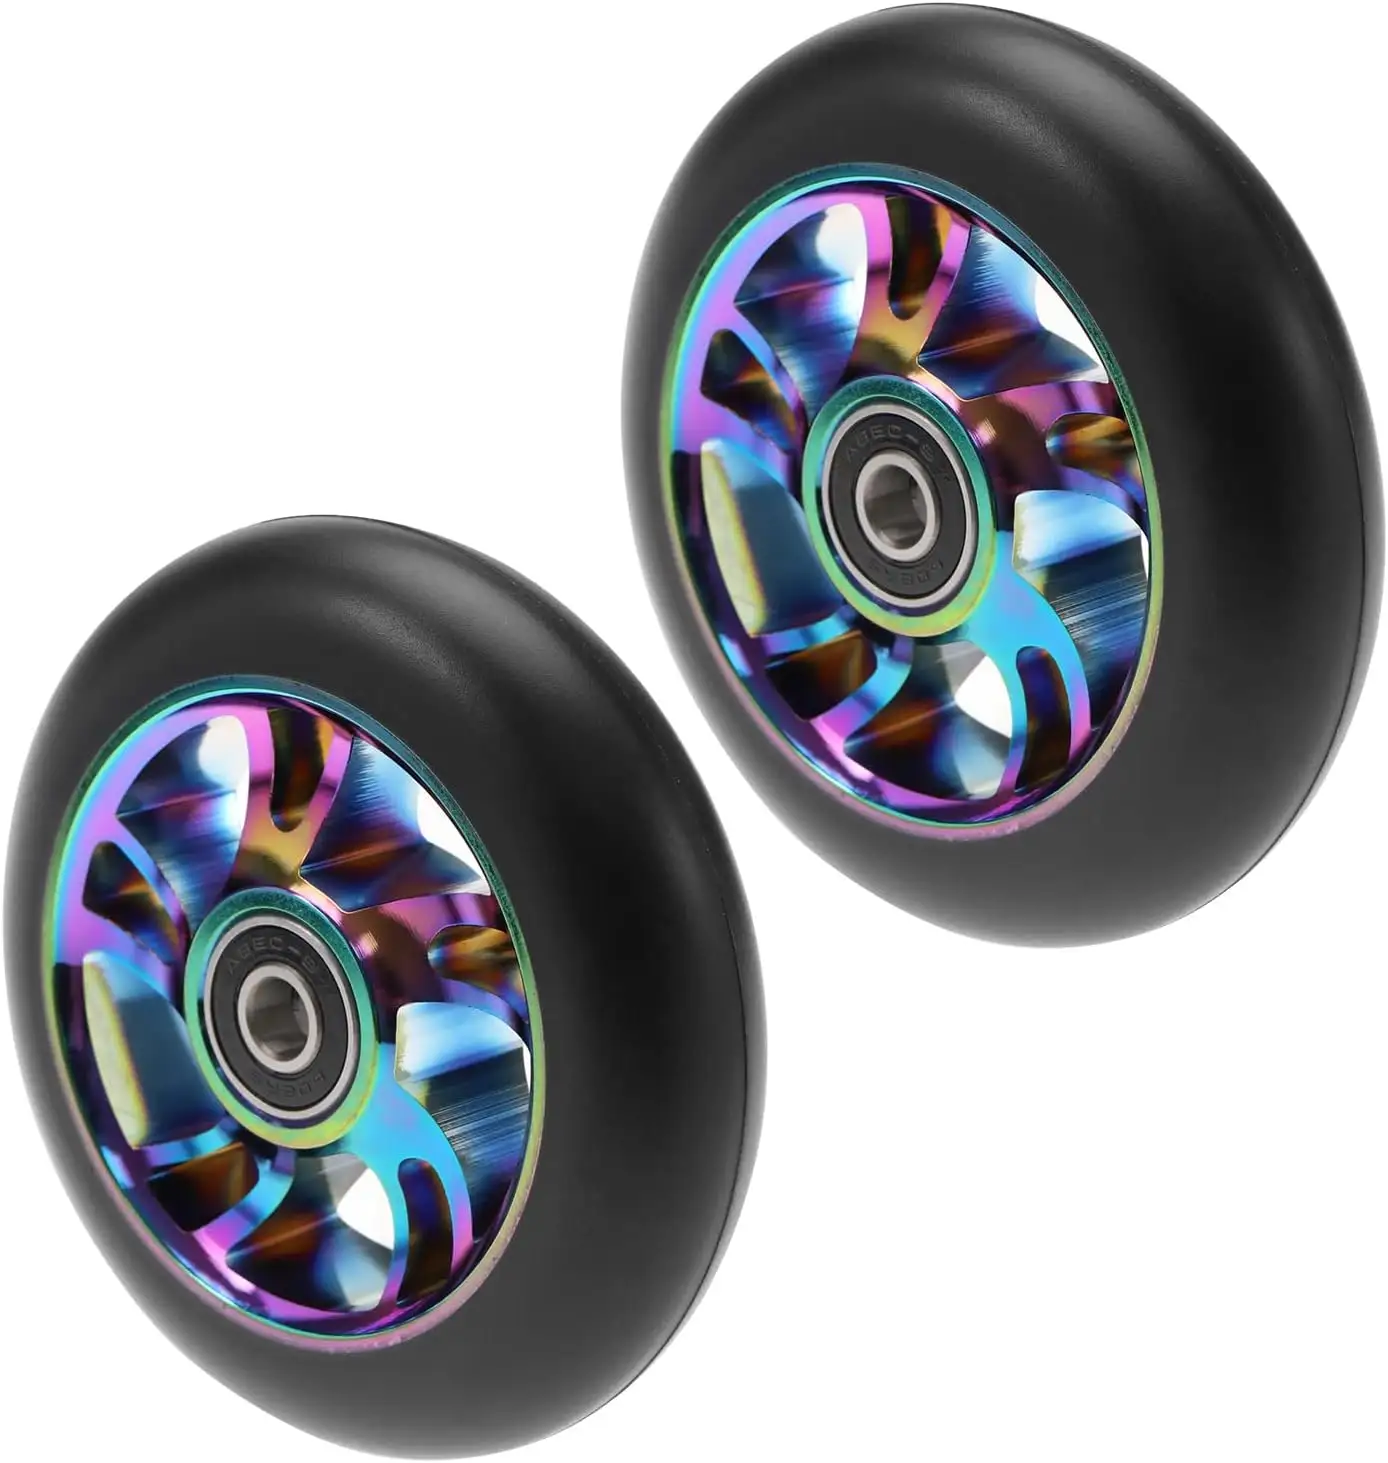 YSMLE Hot Sale Pro stunt scooter wheel 110mm PU with Aluminum Core inline skates wheels